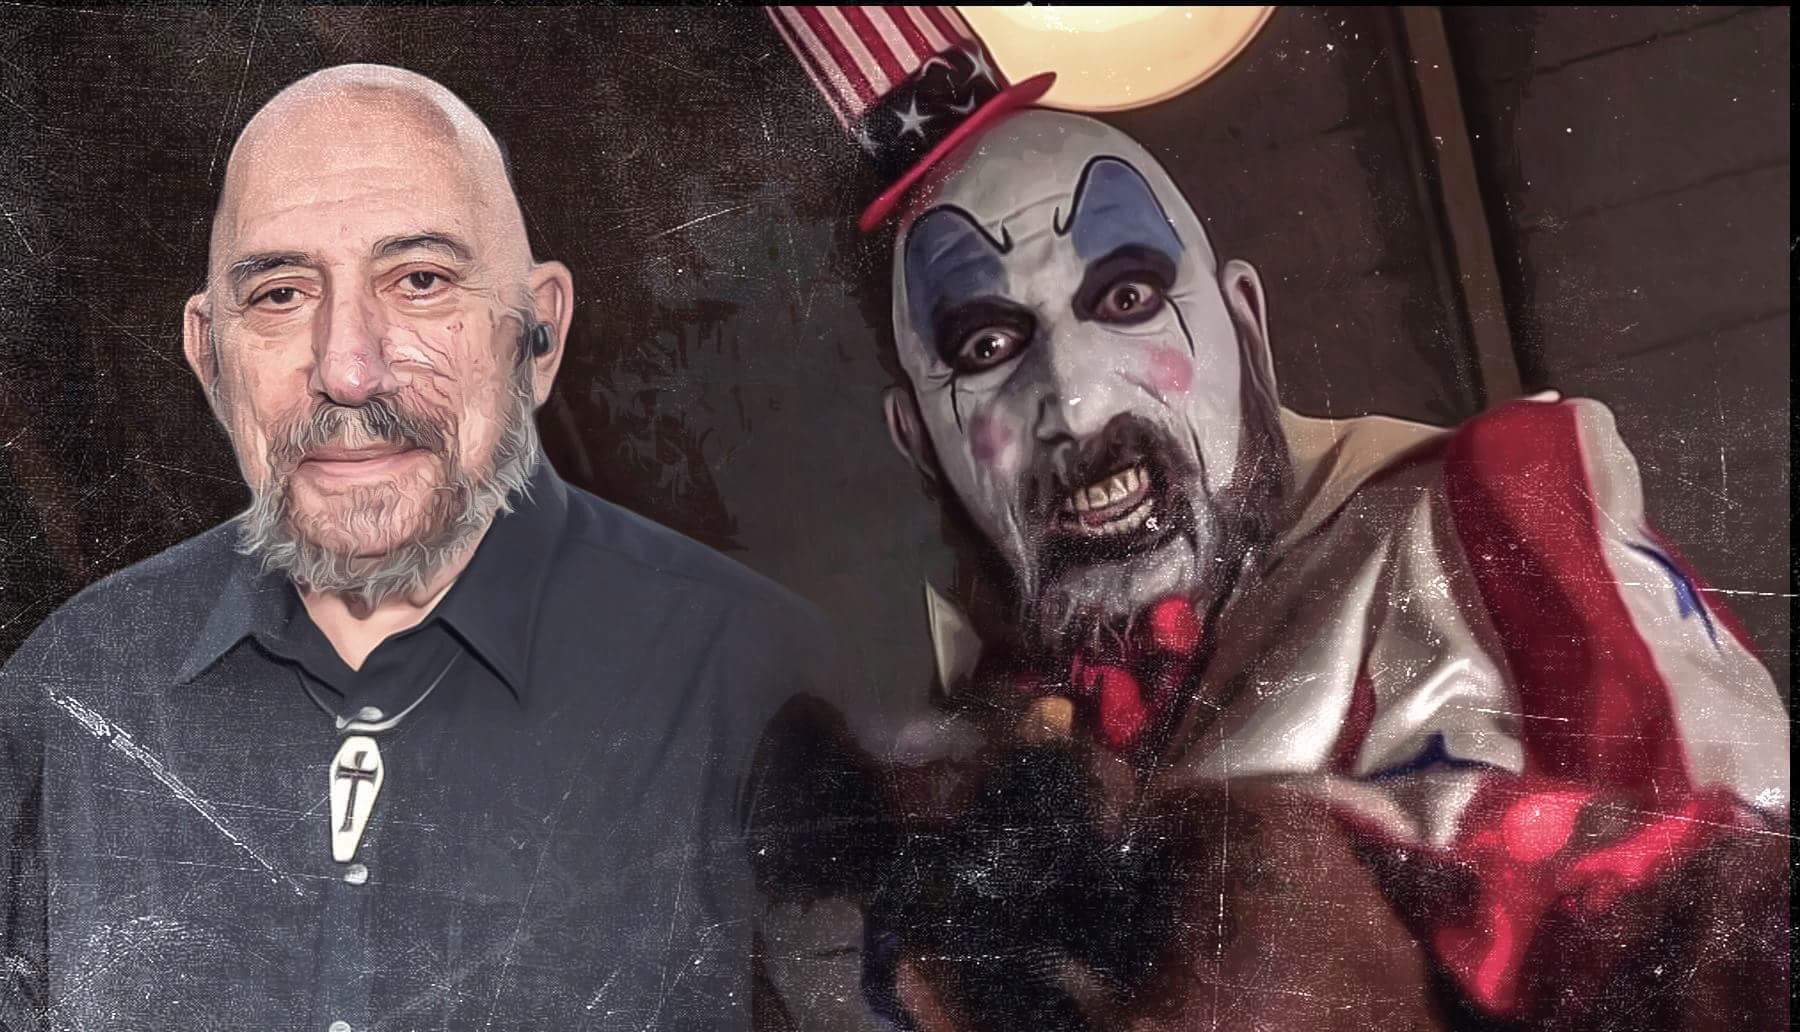 Our Captain Spaulding Turns 79 Today!
